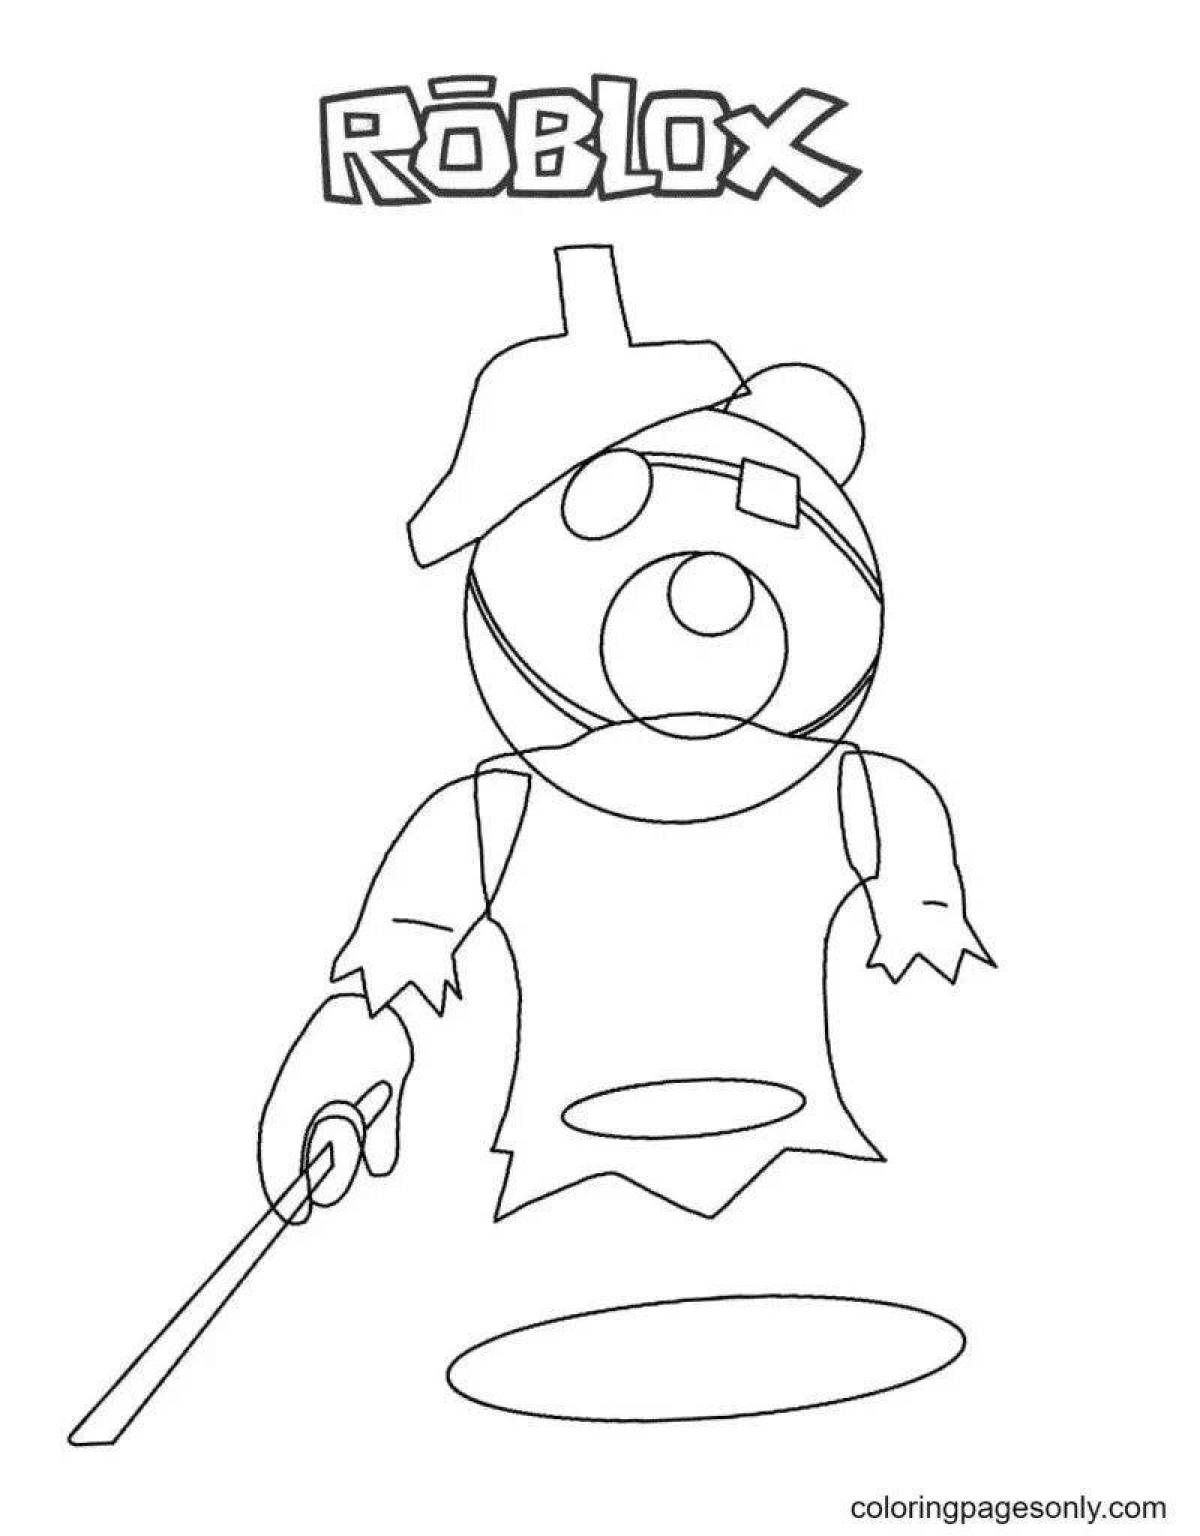 Roblox piggy coloring page